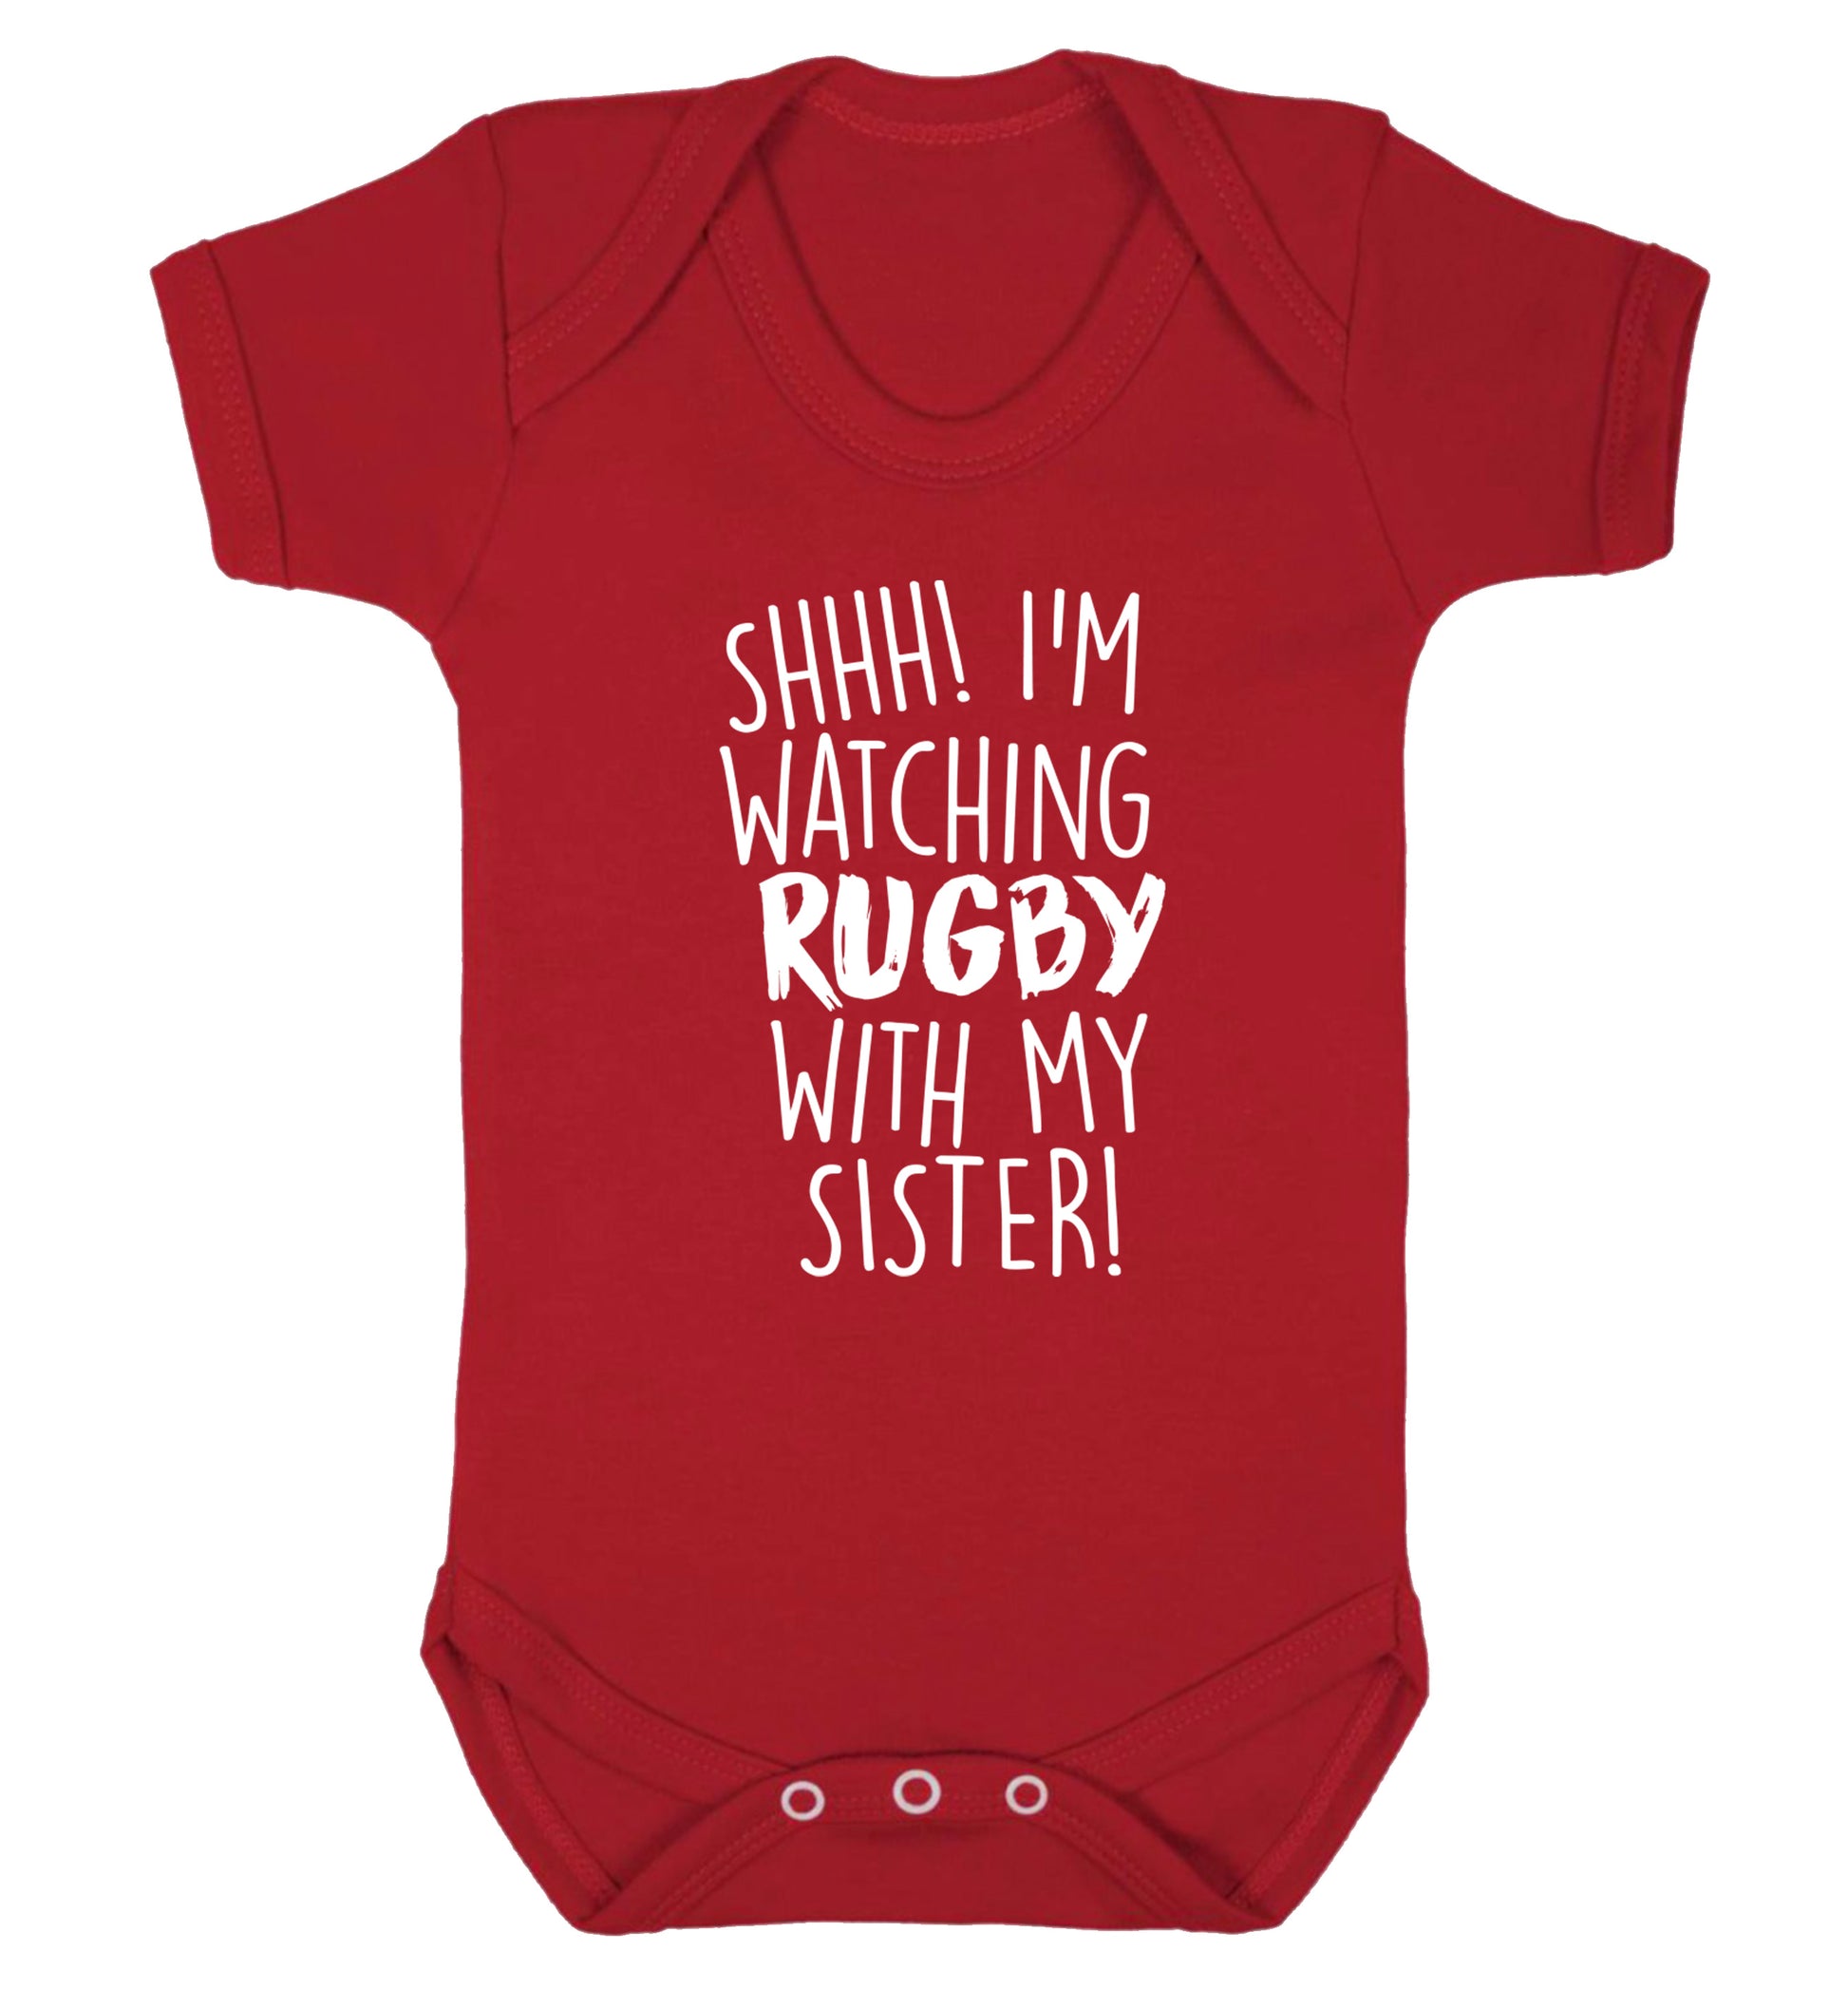 Shh... I'm watching rugby with my sister Baby Vest red 18-24 months